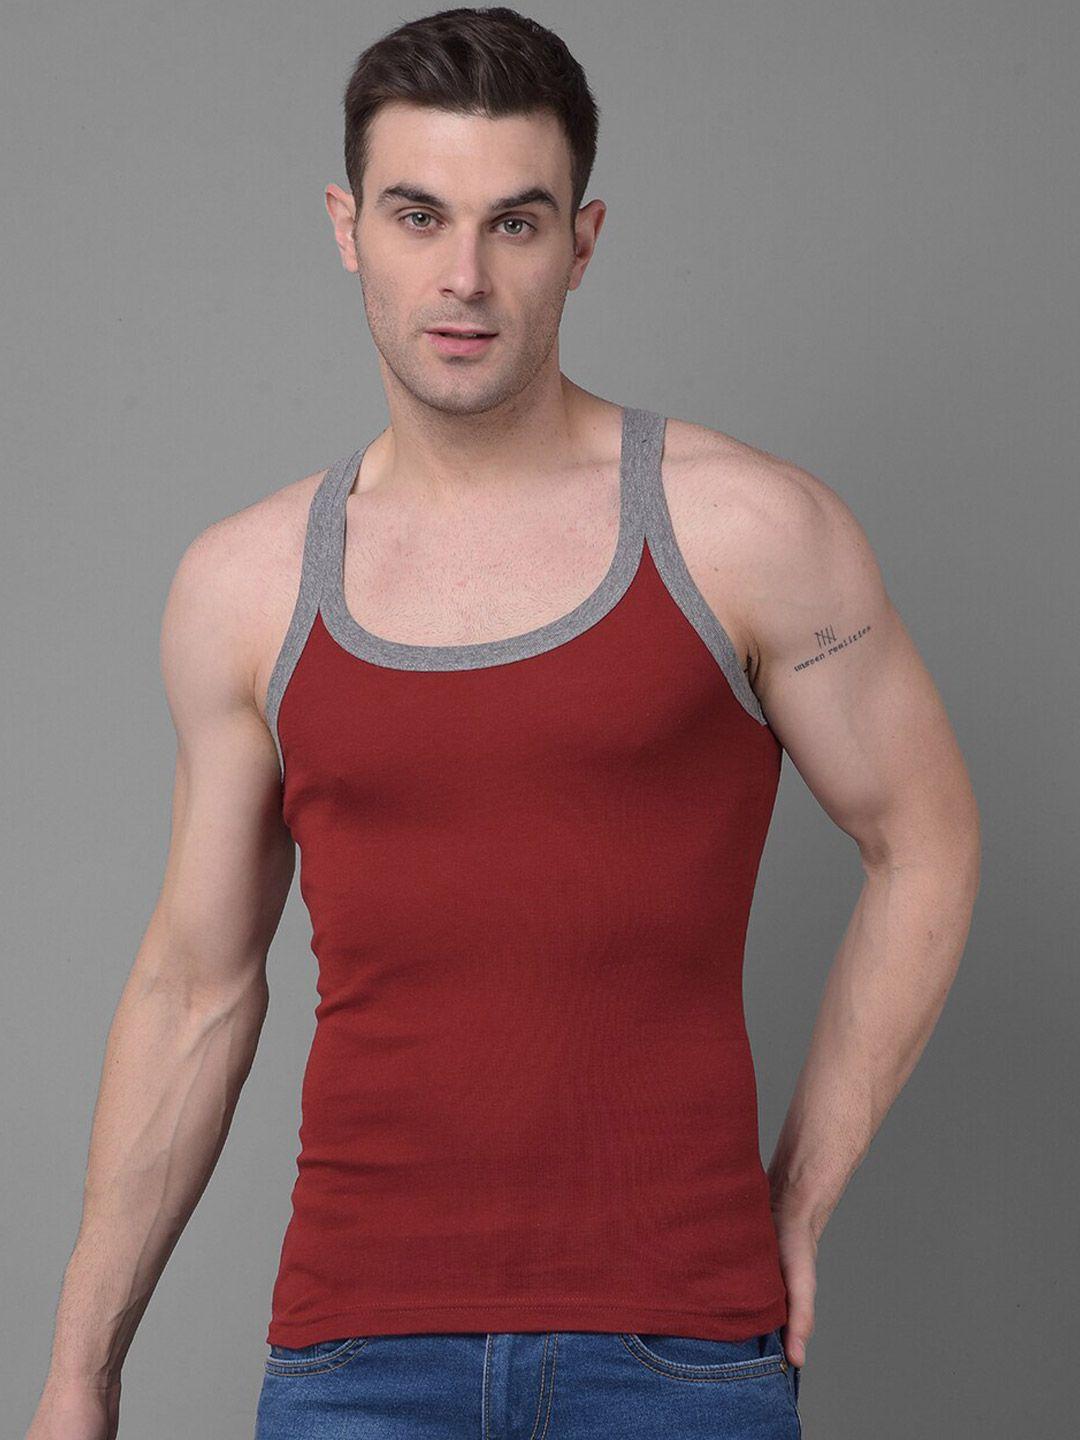 dollar bigboss assorted combed cotton racerback styled gym vest mbb-10-po1-co5-s24